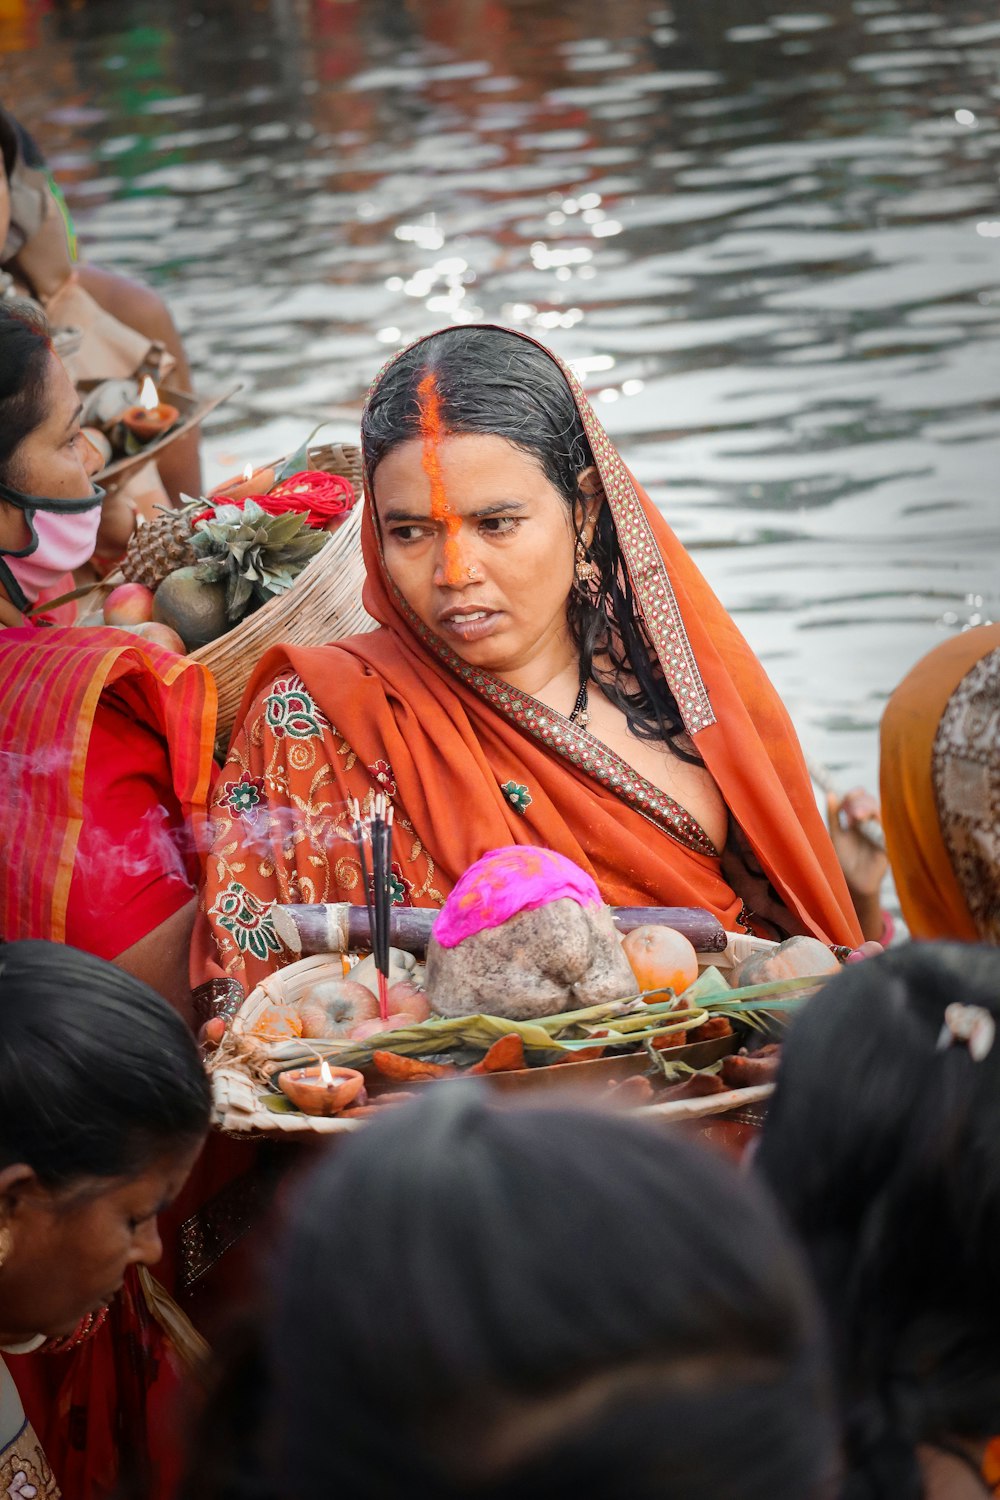 a woman in a sari sitting on a boat in a body of water